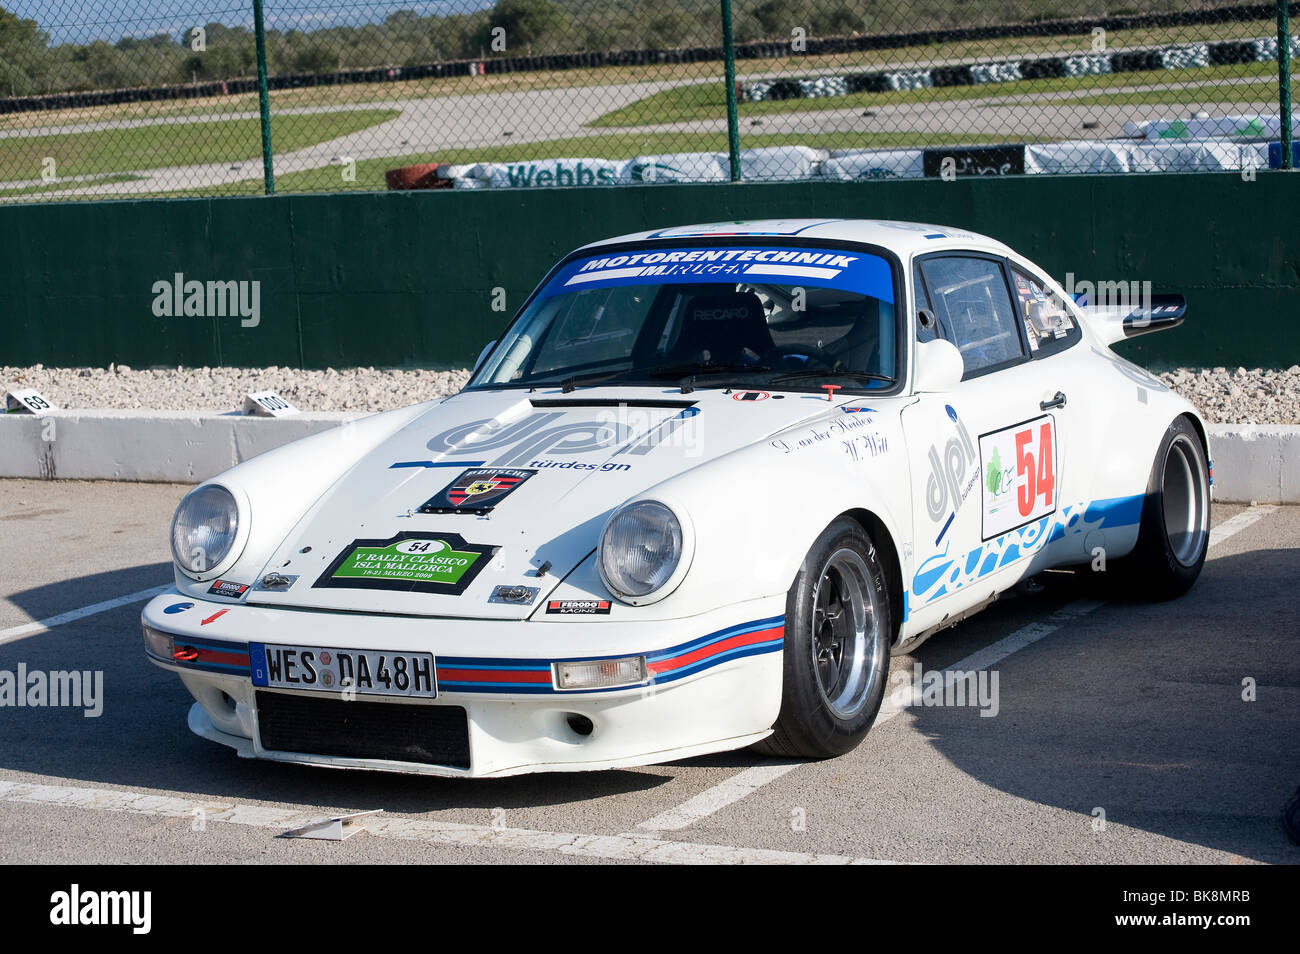 Porsche 911 Carrera taking part in a classic car rally in Spain Stock Photo